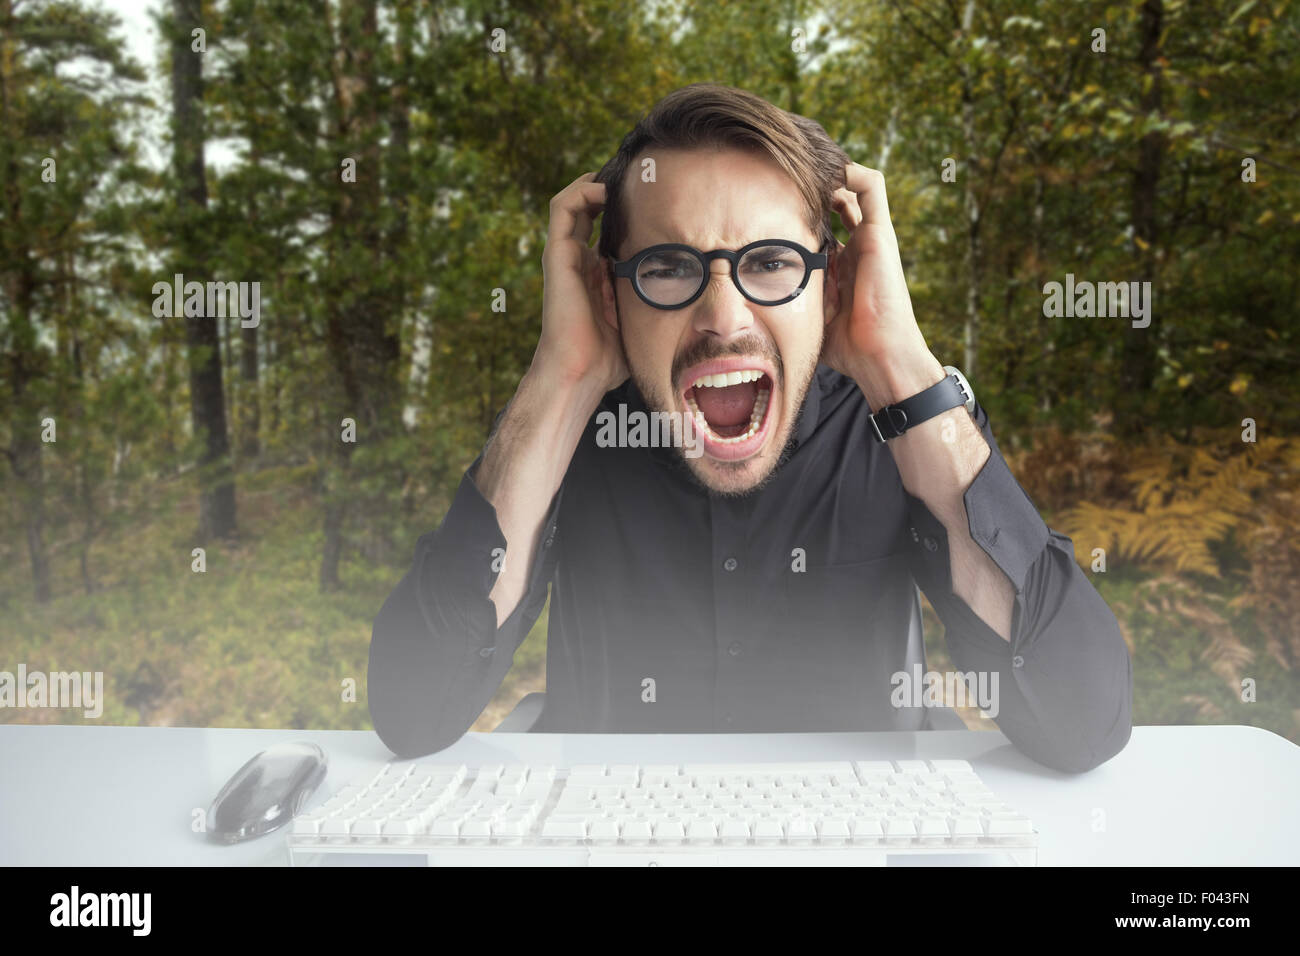 Composite image of businessman yelling with his hands on face Stock Photo